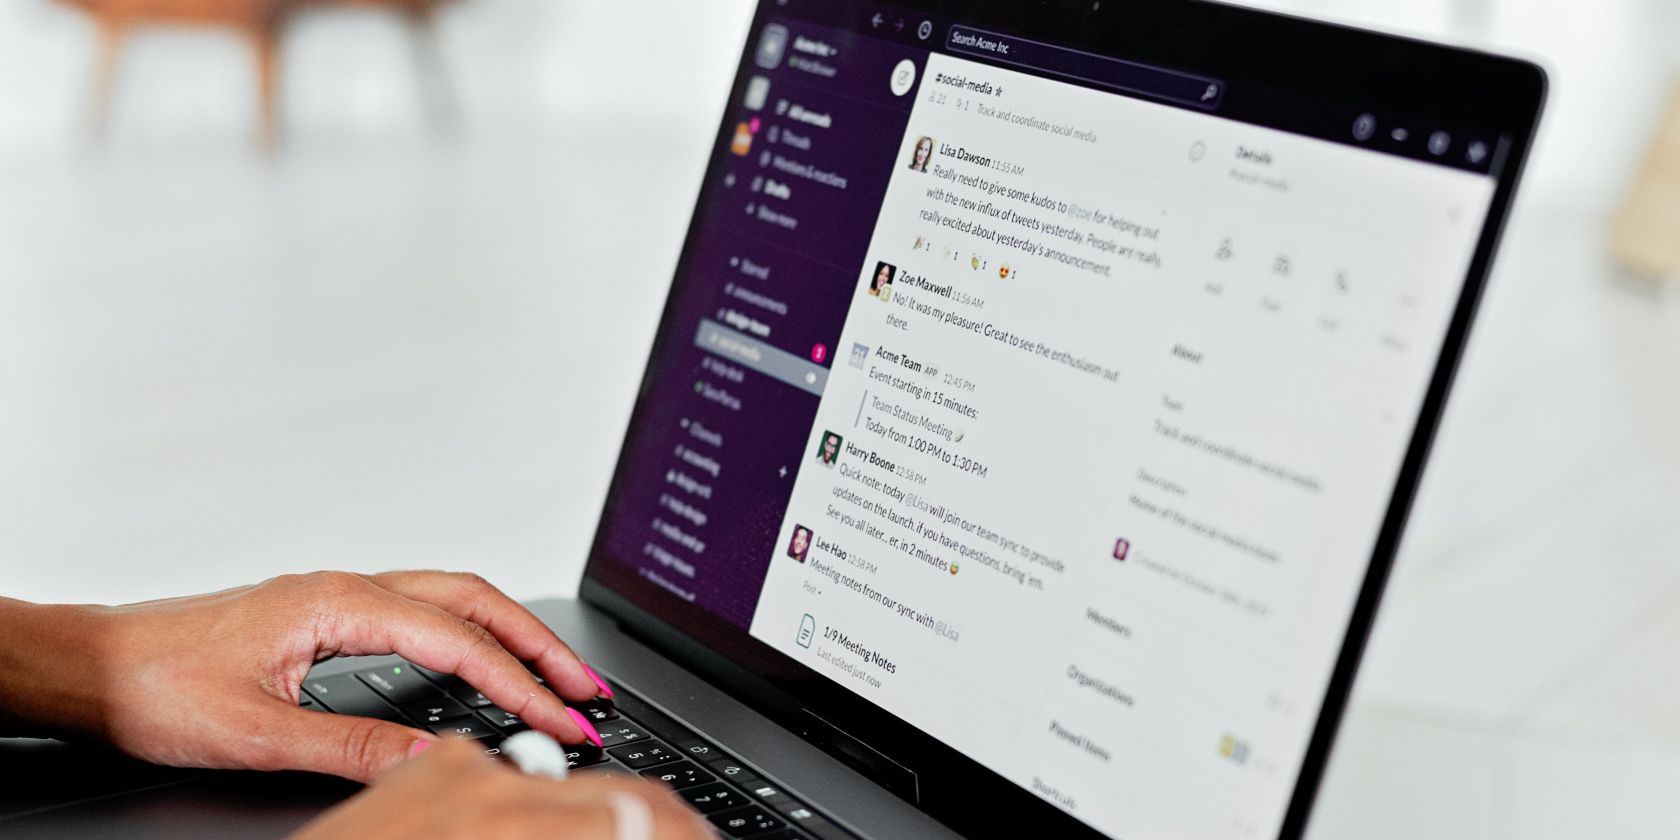 Image shows a woman using Slack on a laptop